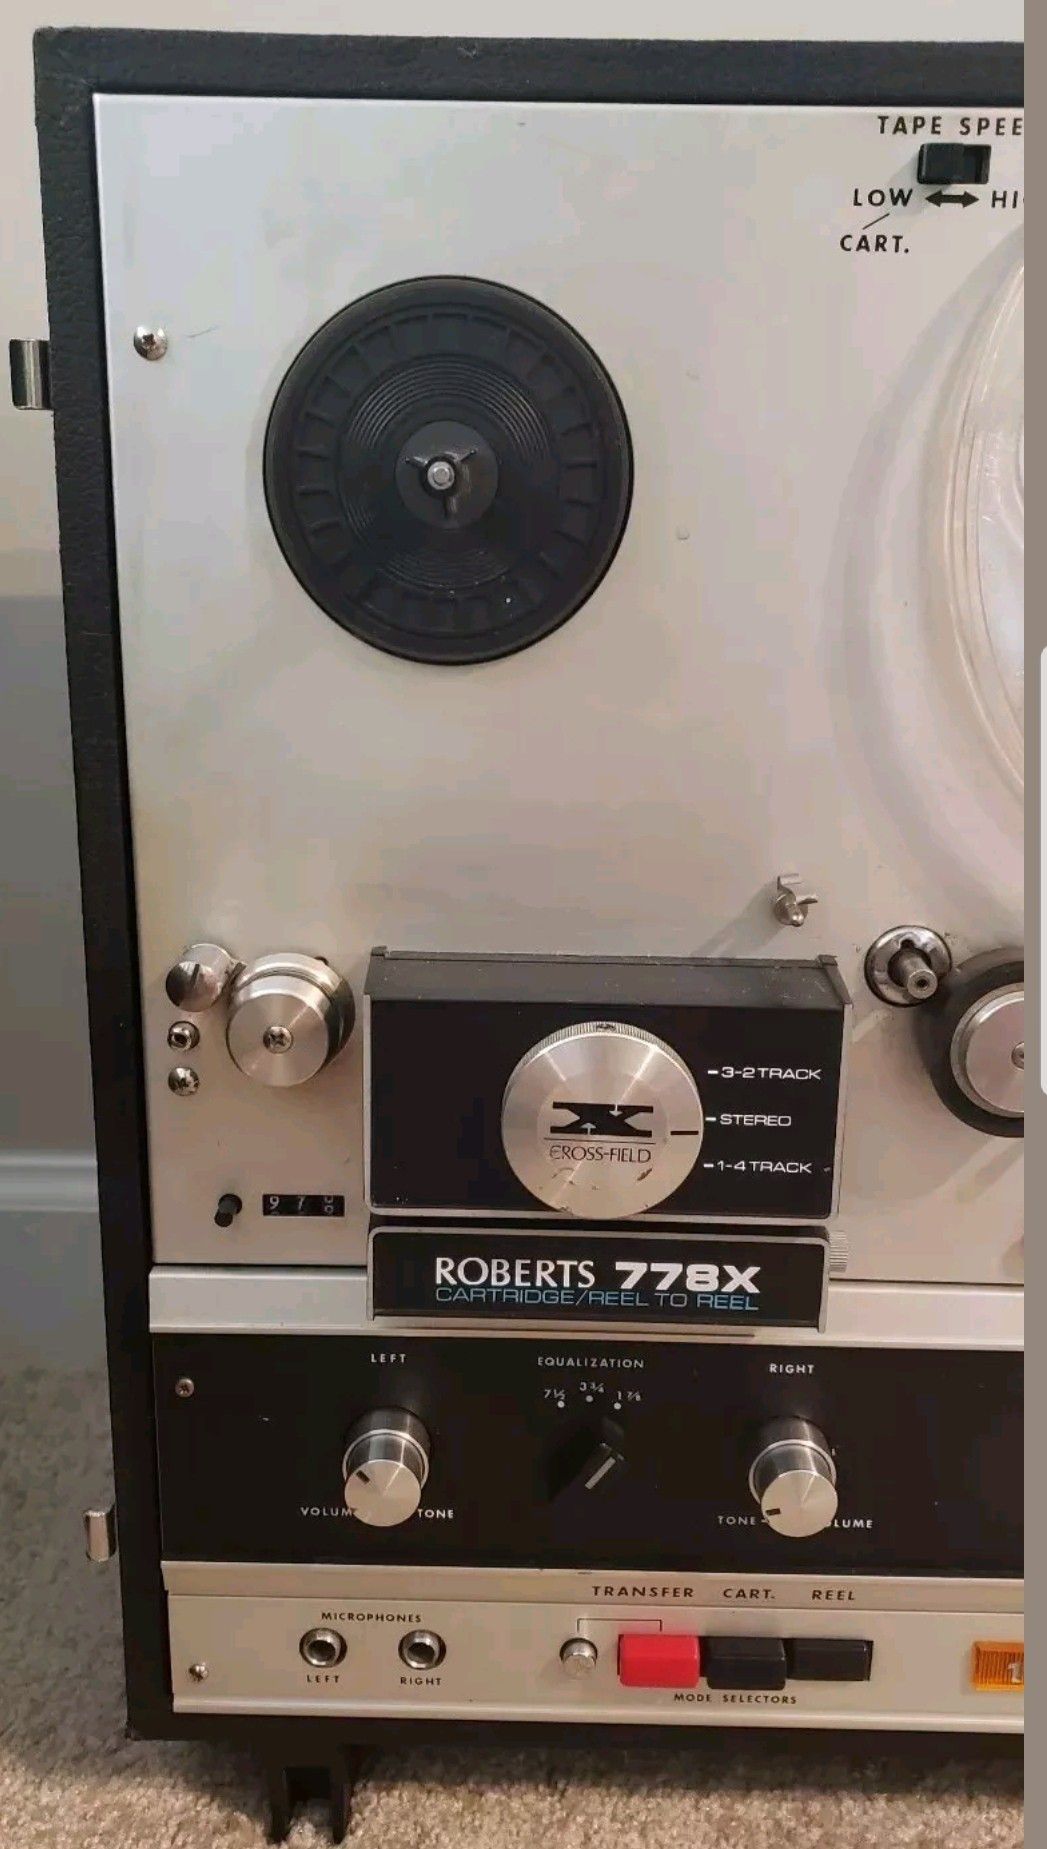 ROBERTS 778X Rheem by AKAI - Reel to Reel Tape recorder - Stereo 8 track  for Sale in Fort Mill, SC - OfferUp